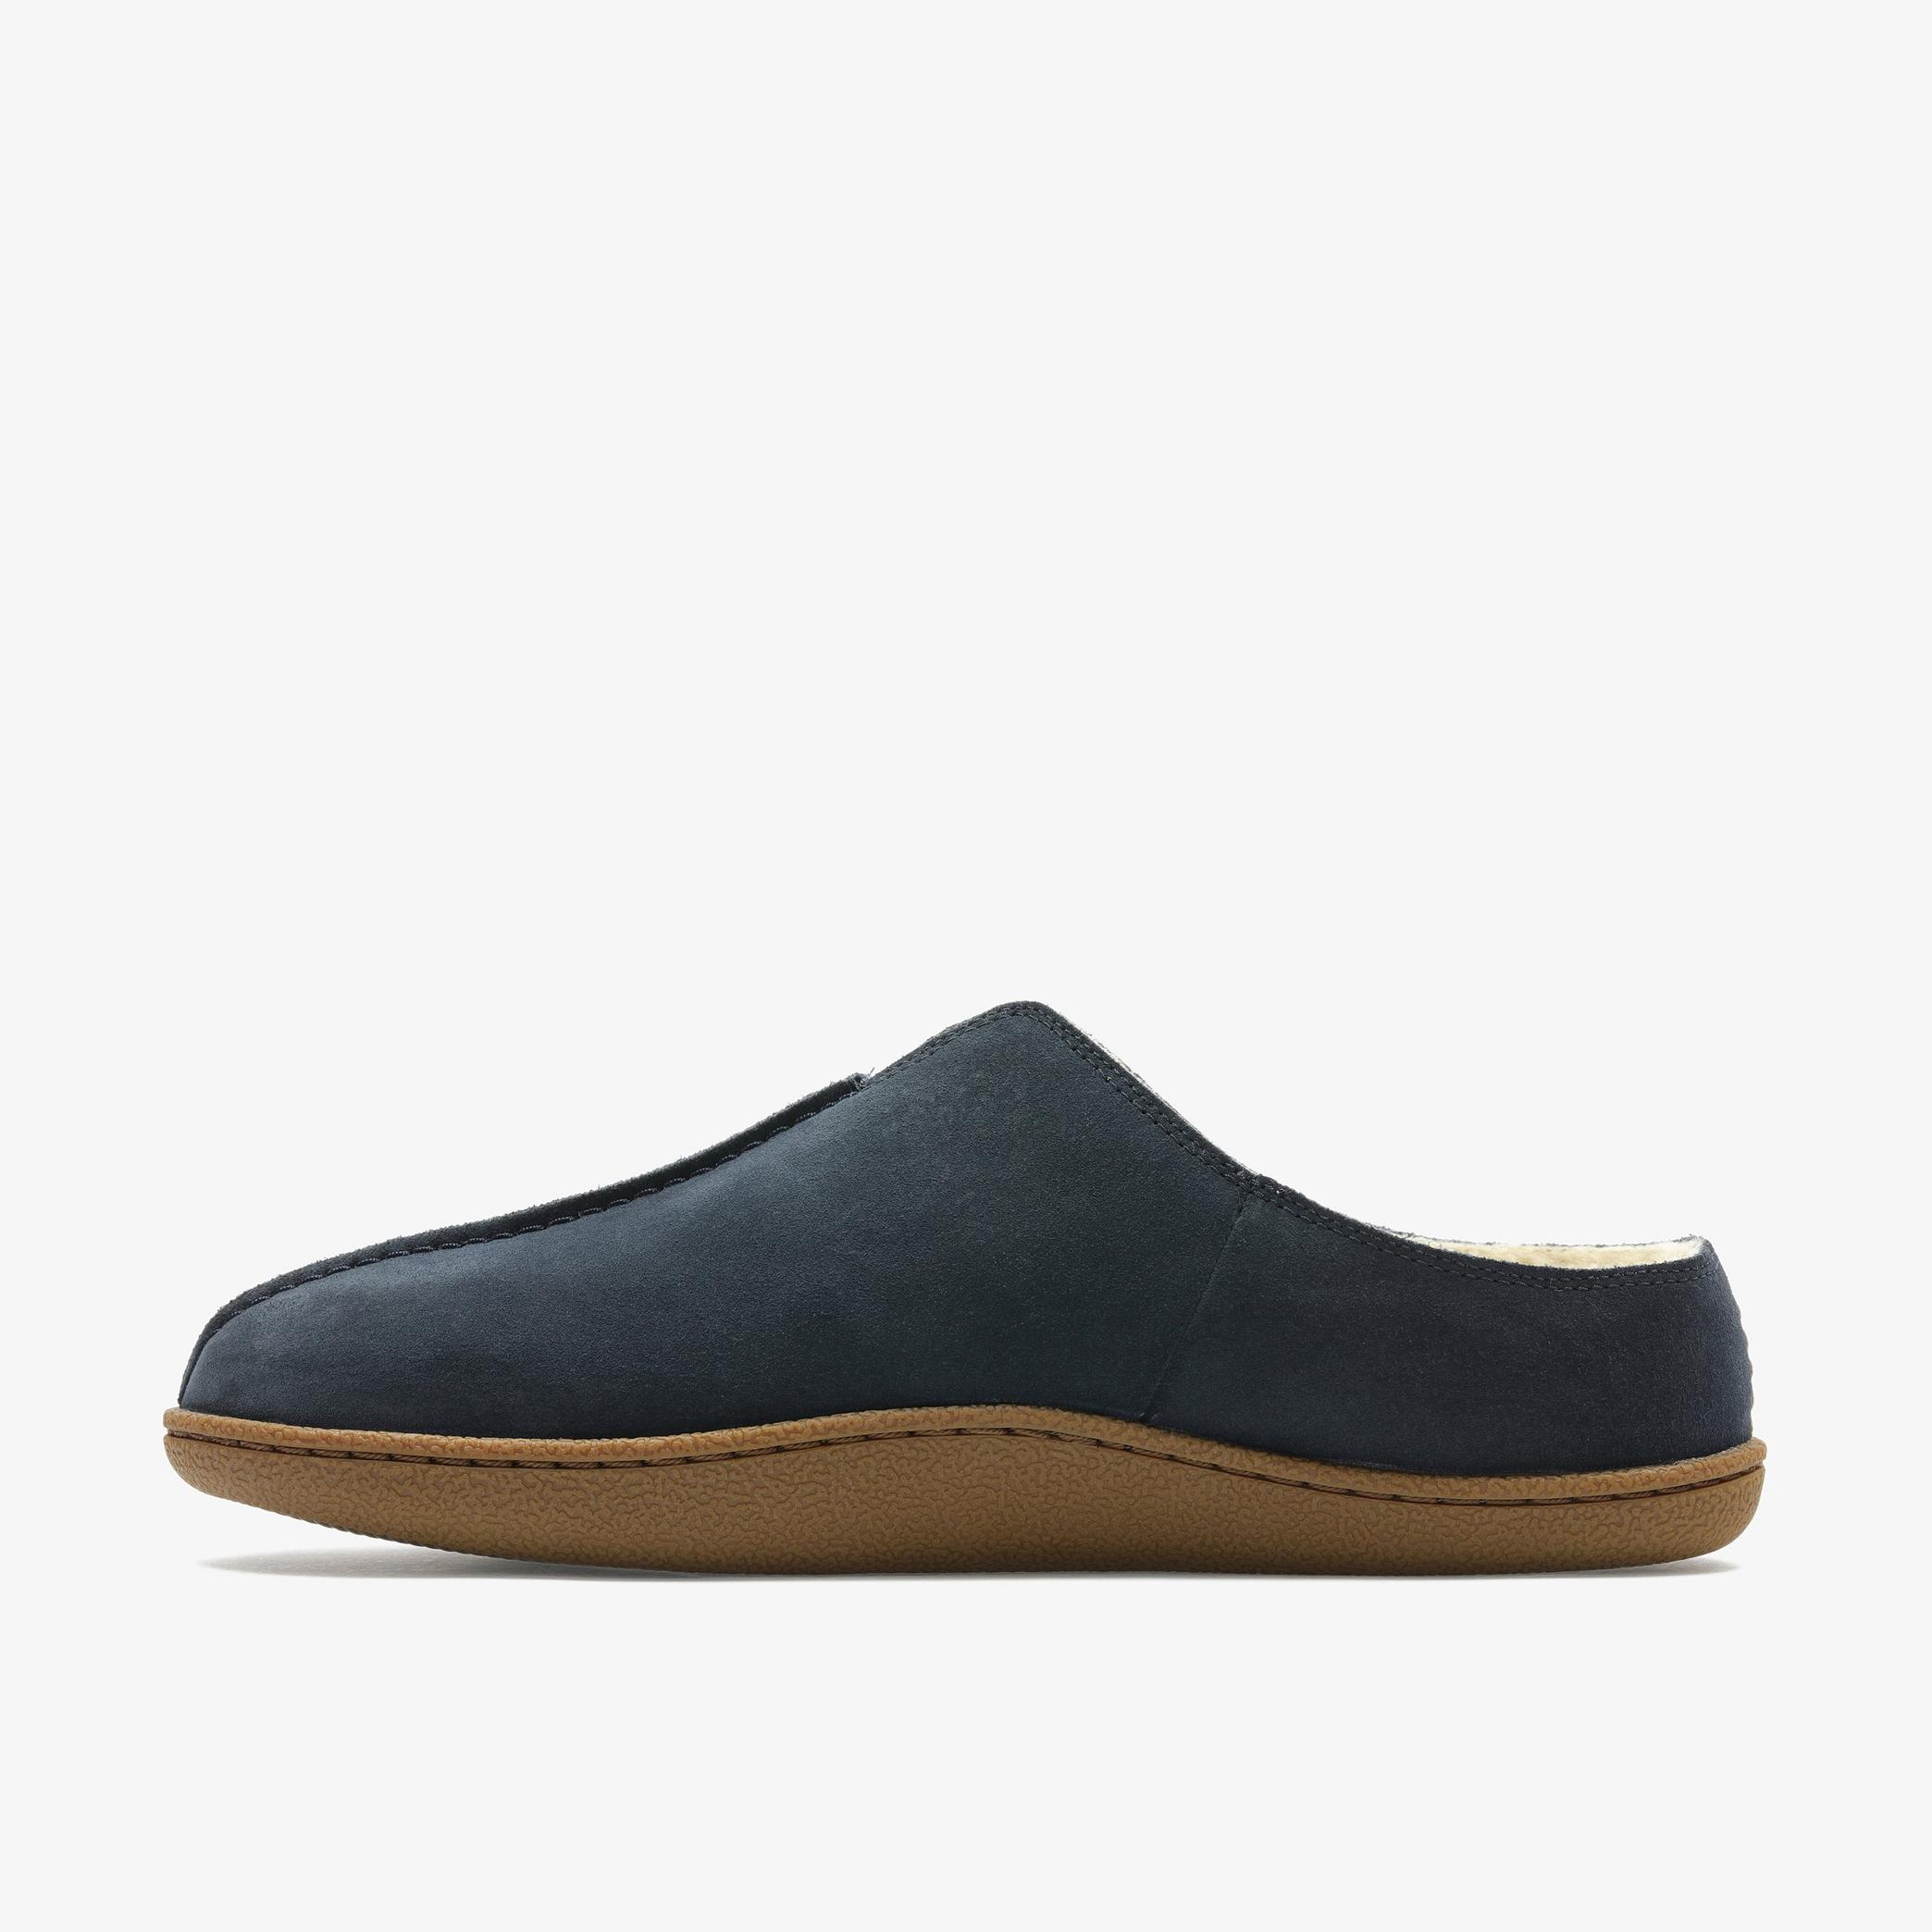 Home Mule Navy Suede Slippers, view 2 of 6